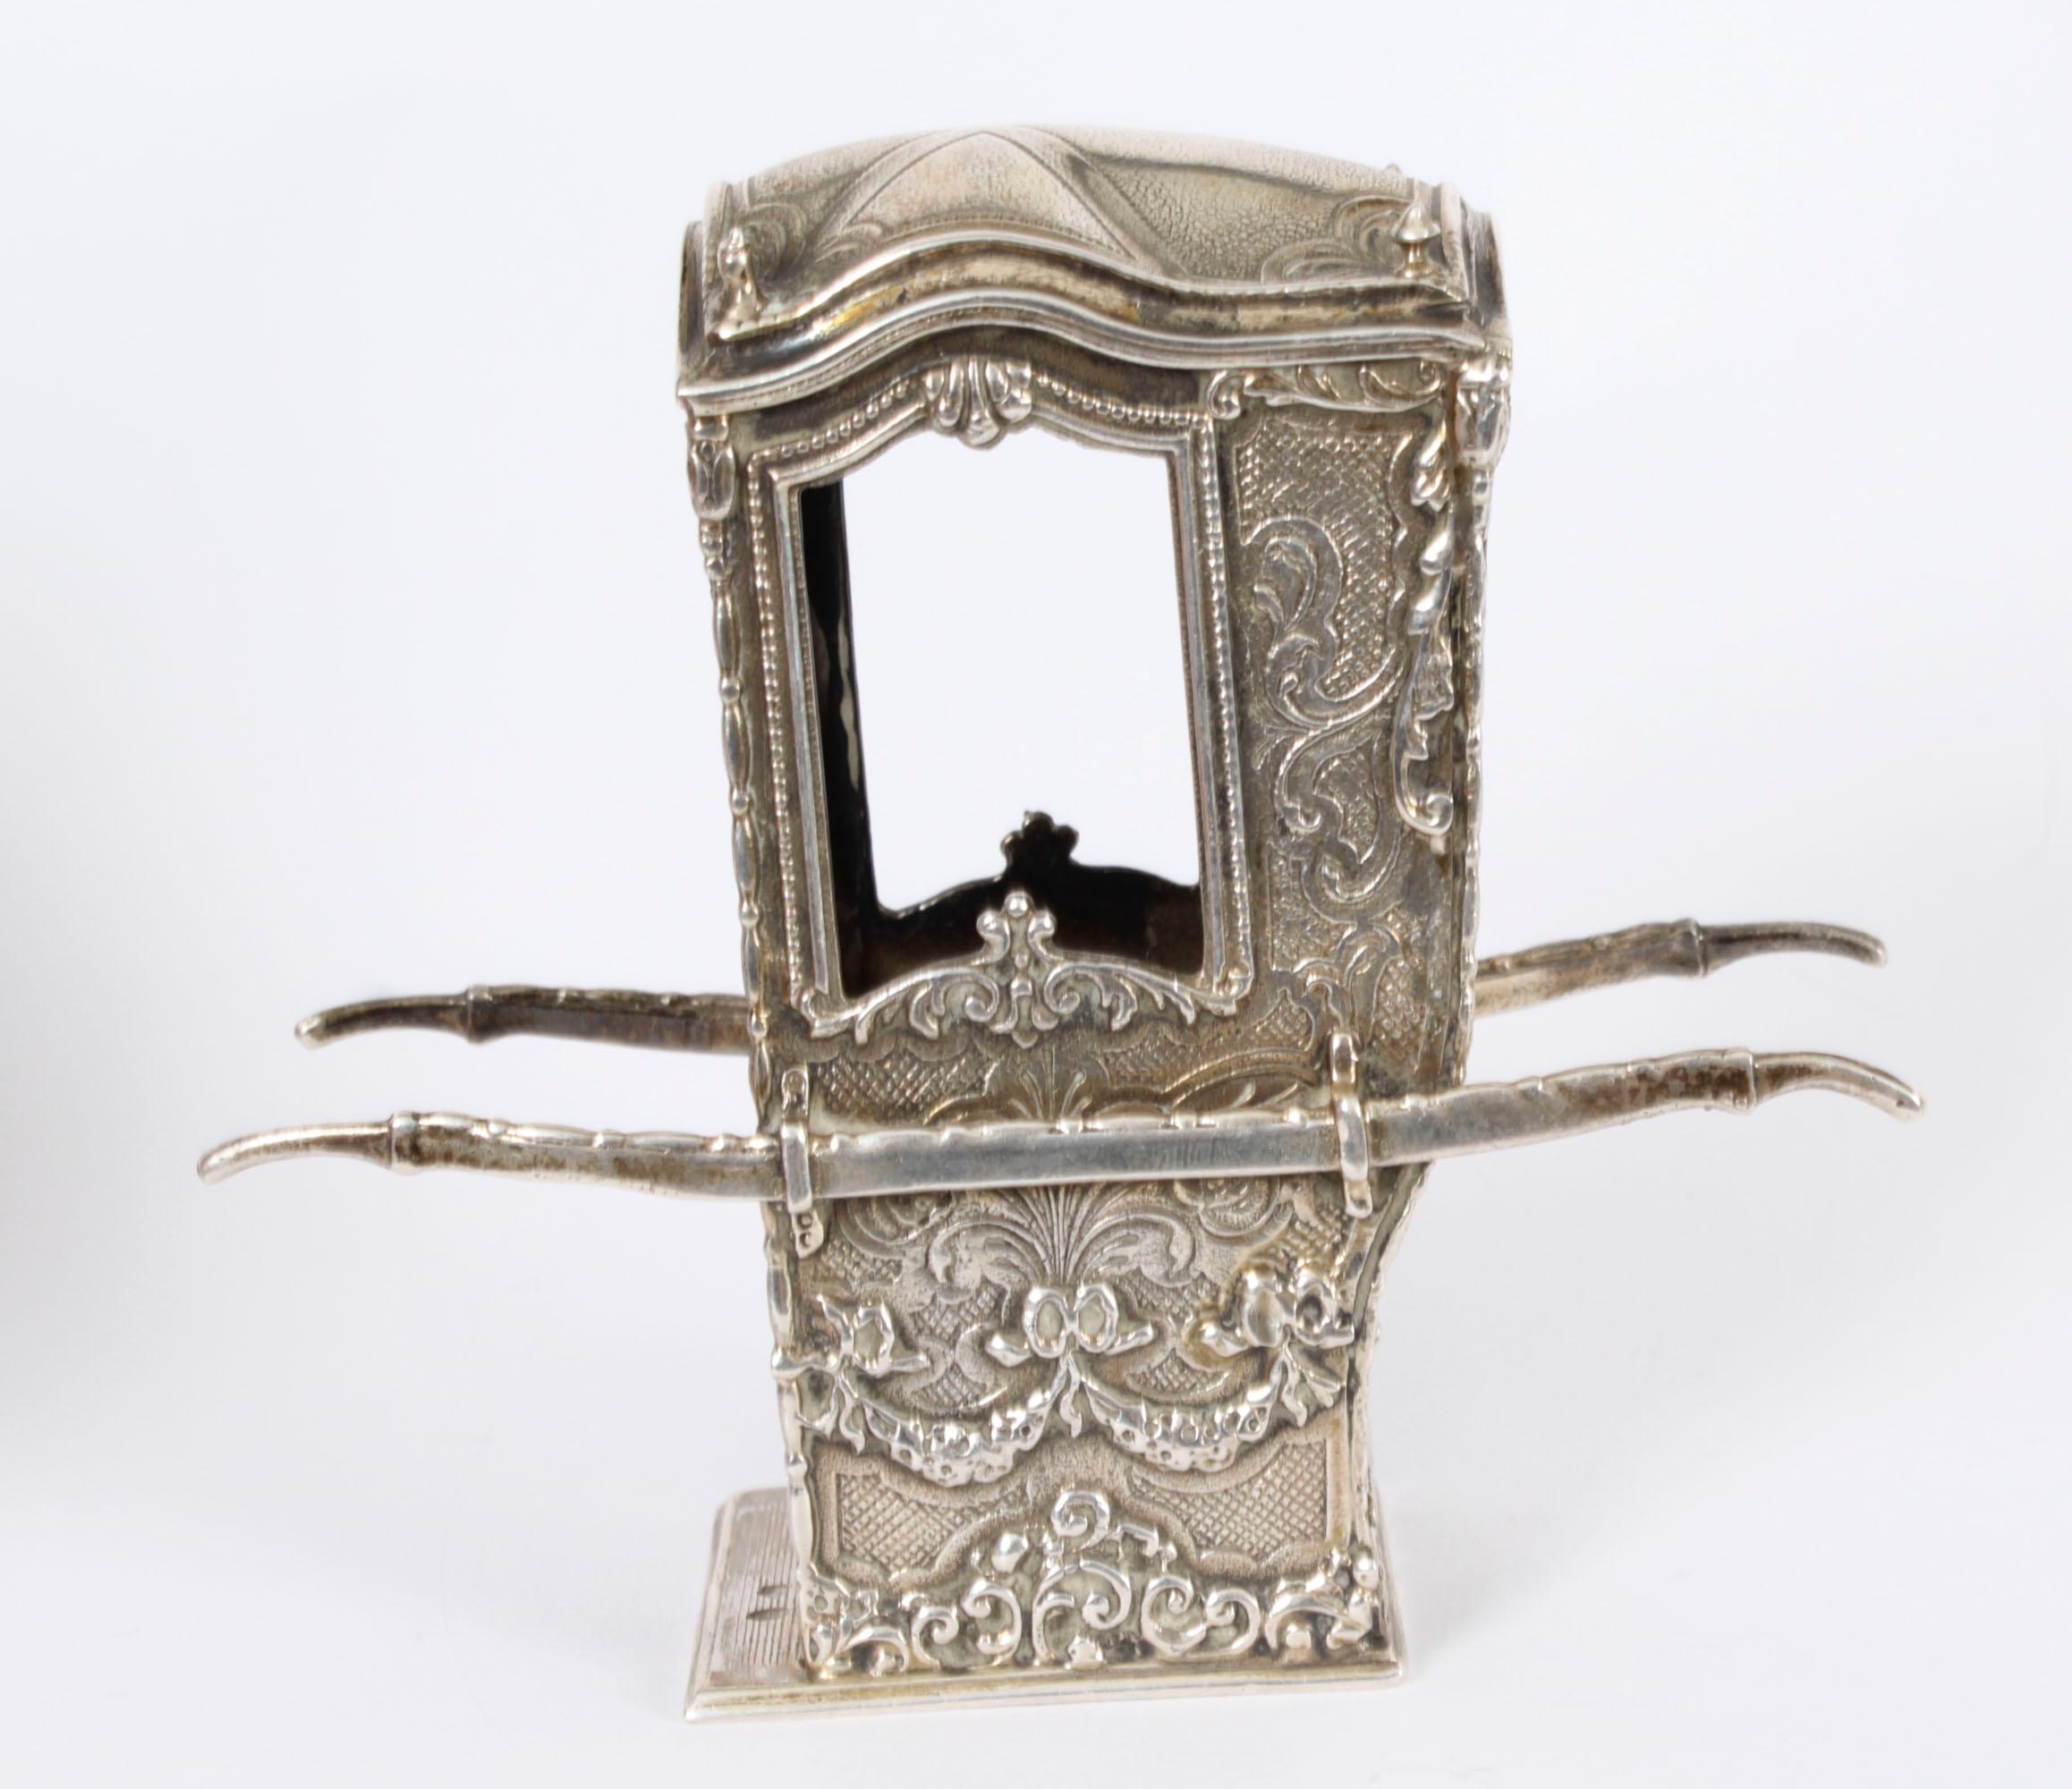 AntiqueFrench Silver Miniature Sedan Chair 19th Century For Sale 6